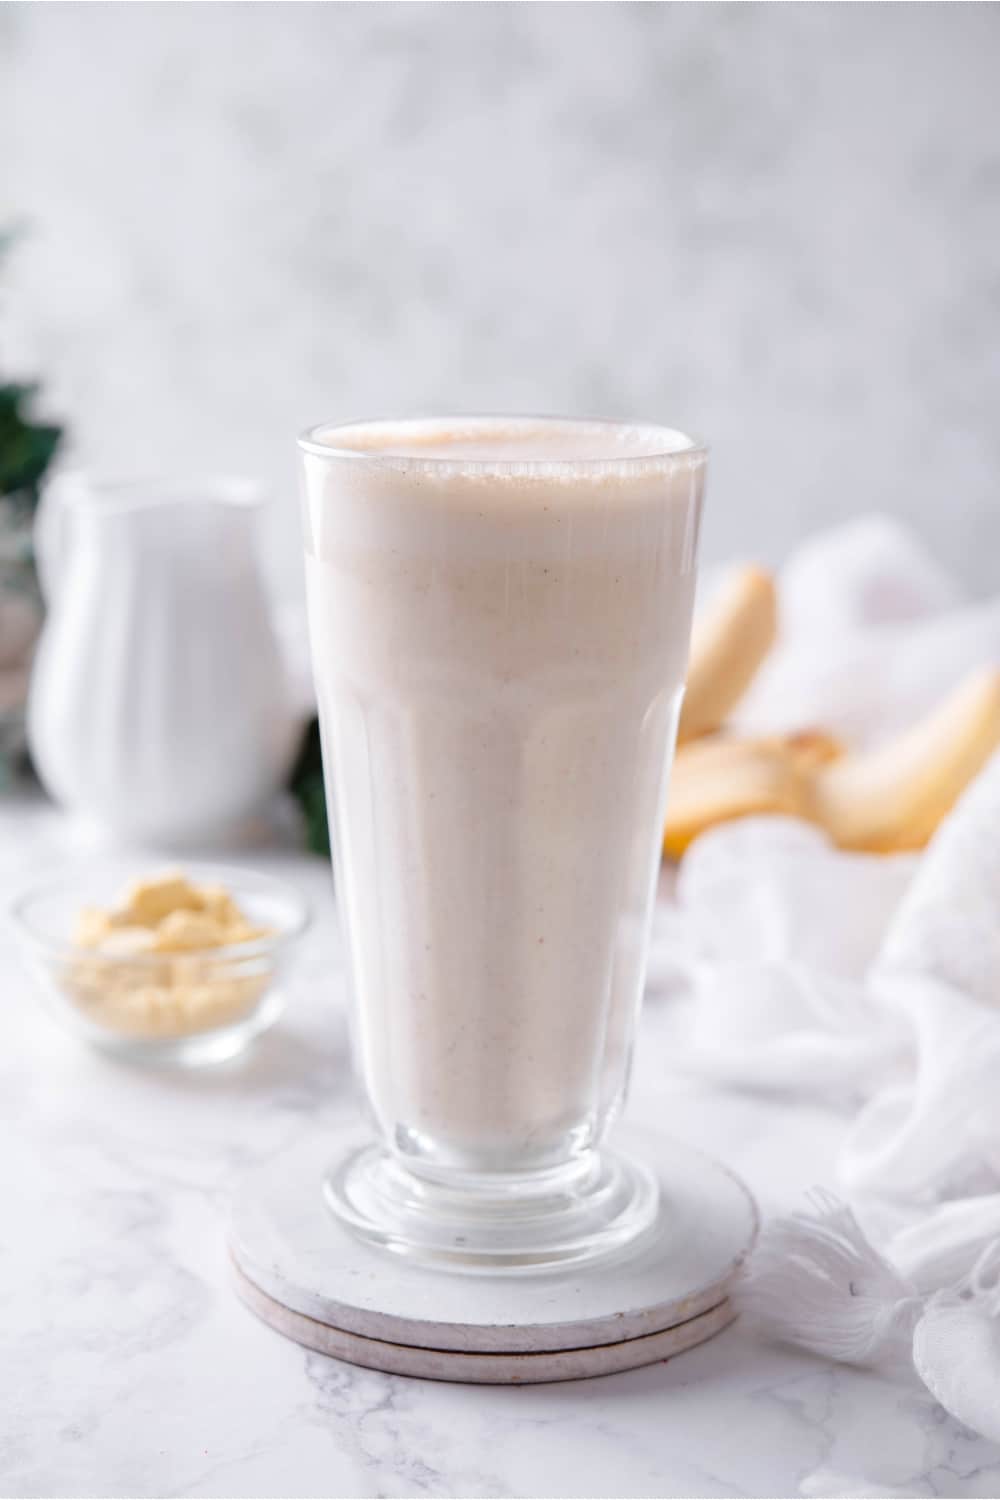 A glass filled with a banana protein shake.